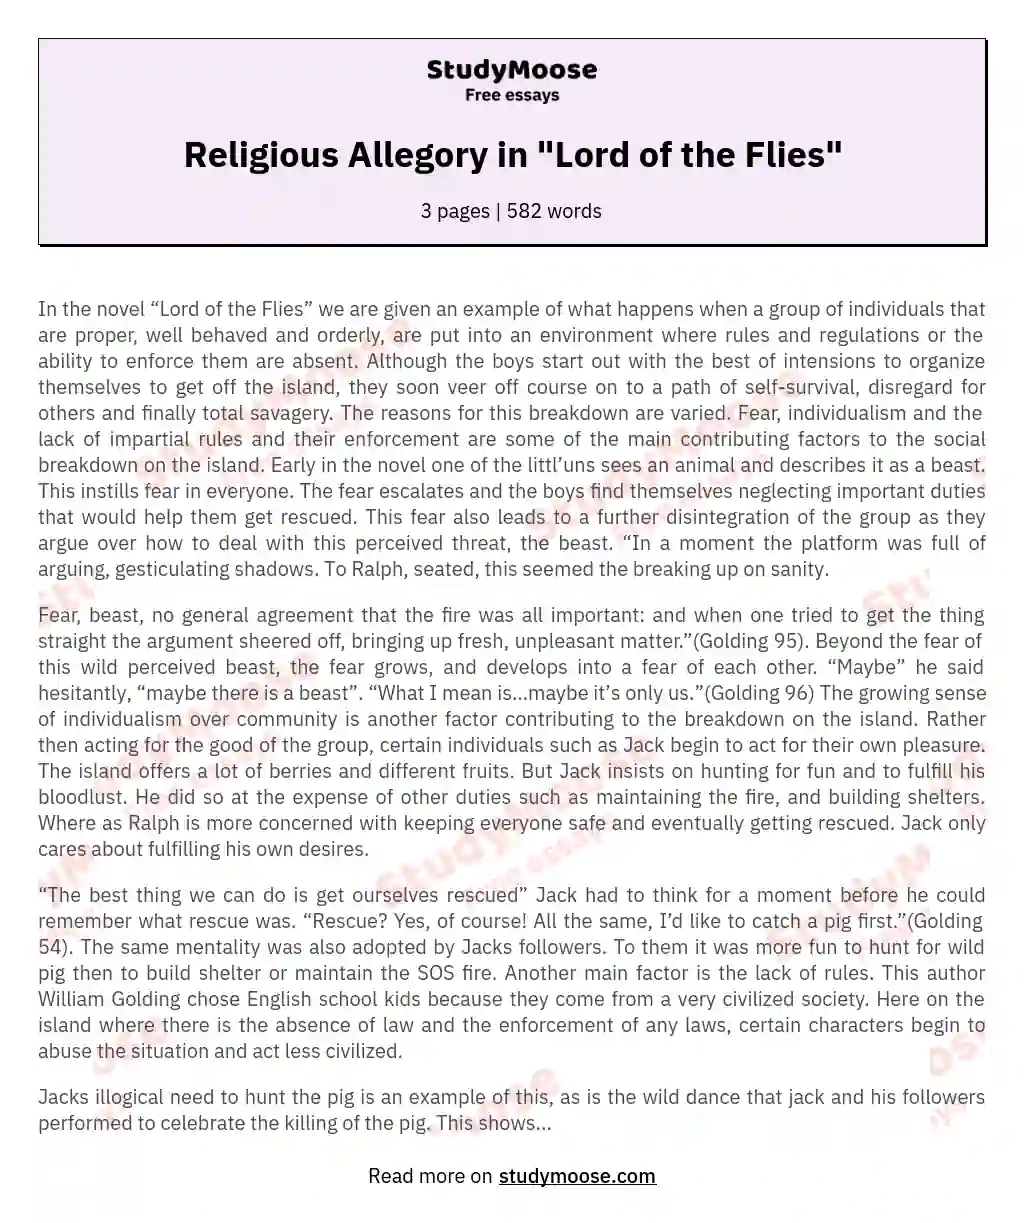 Religious Allegory in "Lord of the Flies"